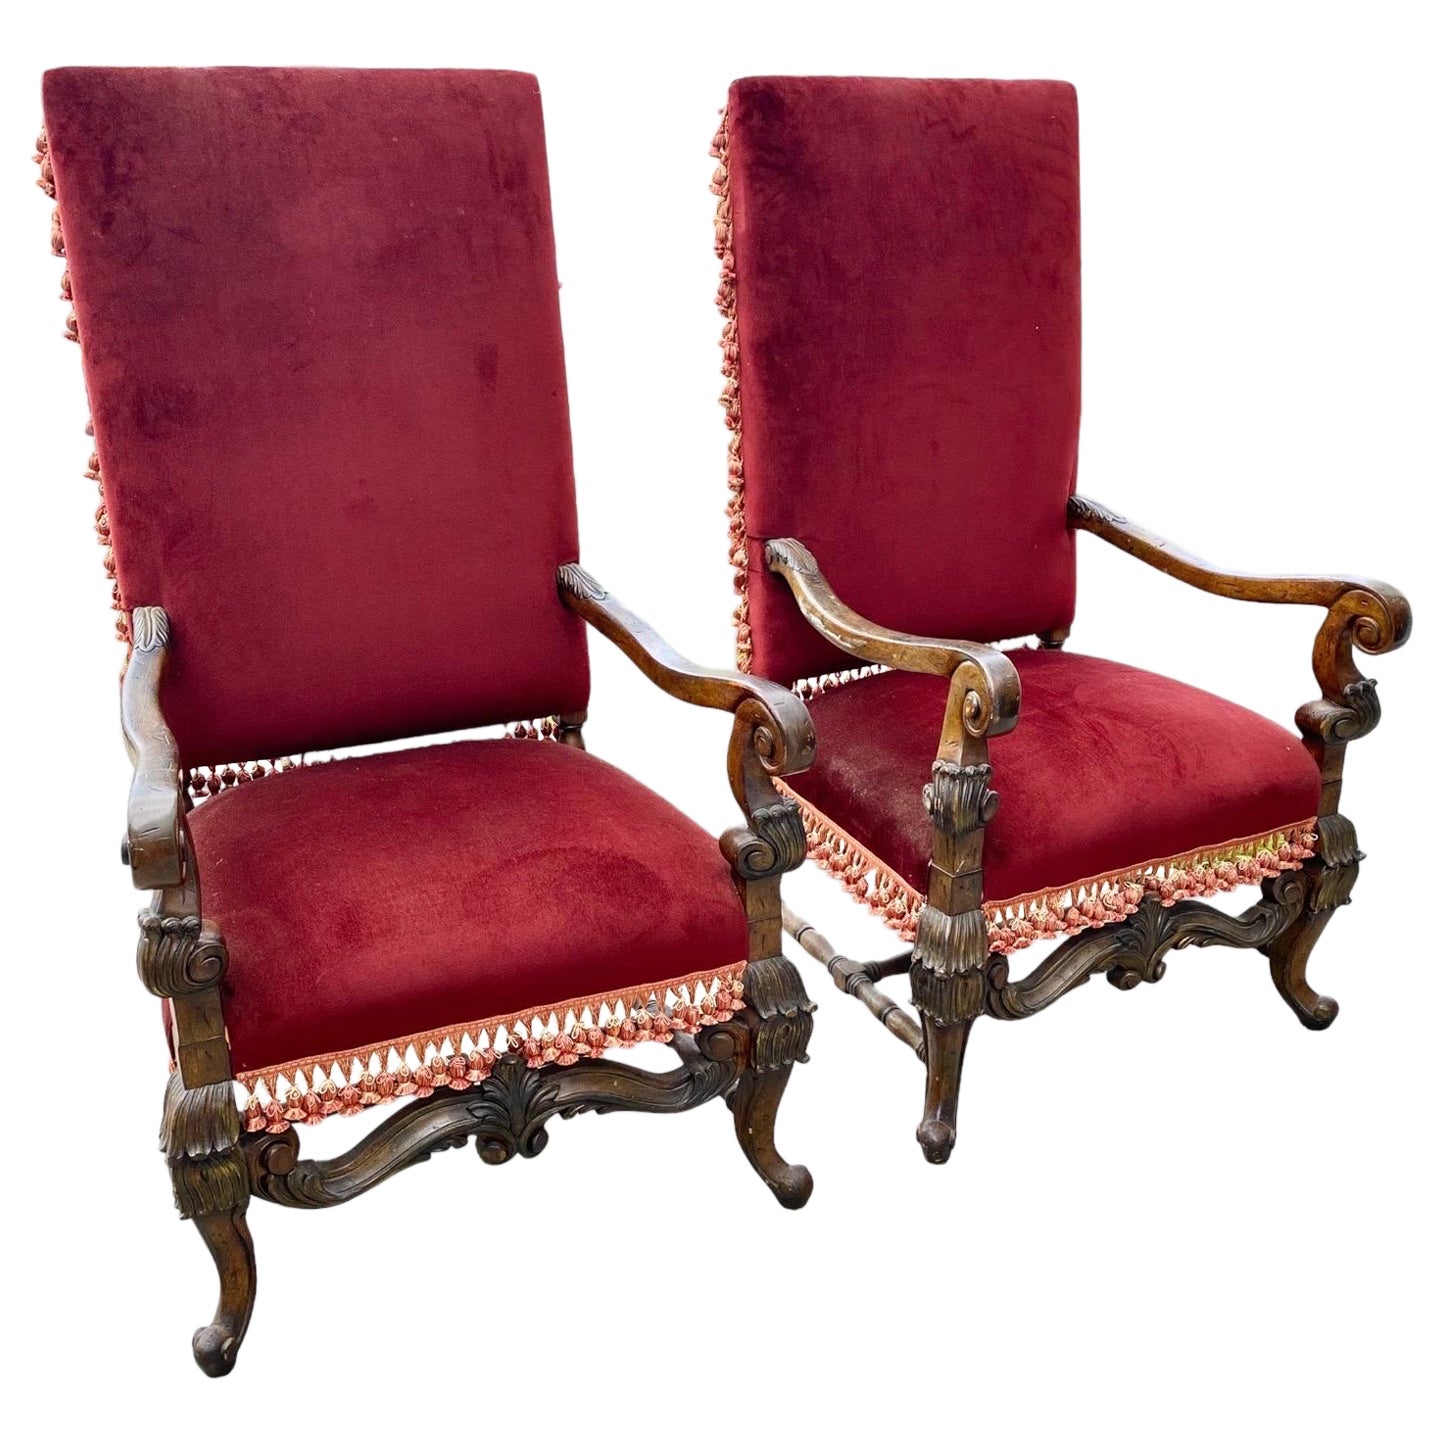 Pair of Vintage French Louis XIII Fauteuils, Armchairs